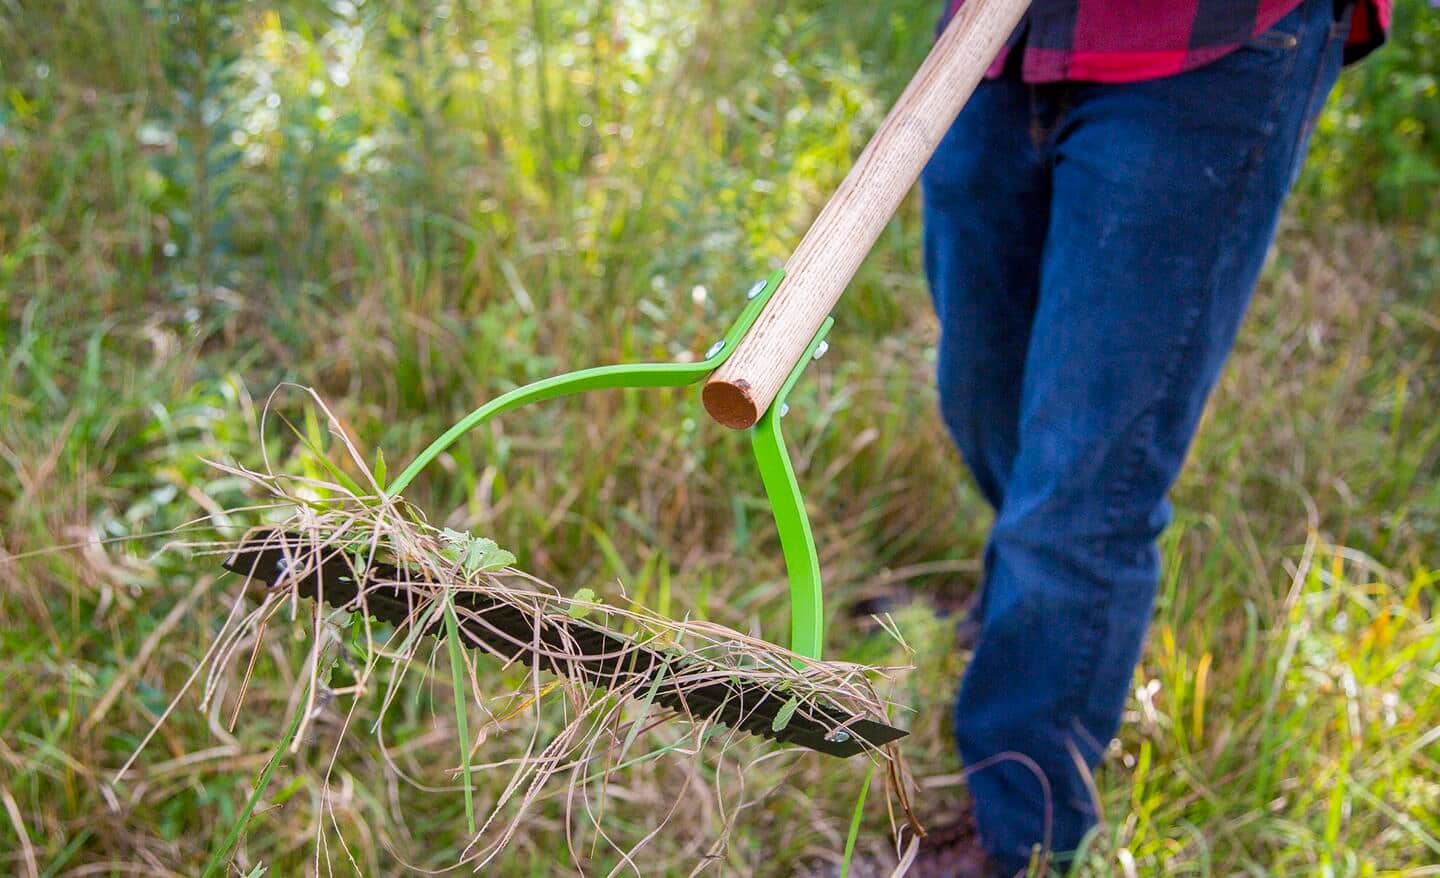 Person uses a weeding tool to clear brush